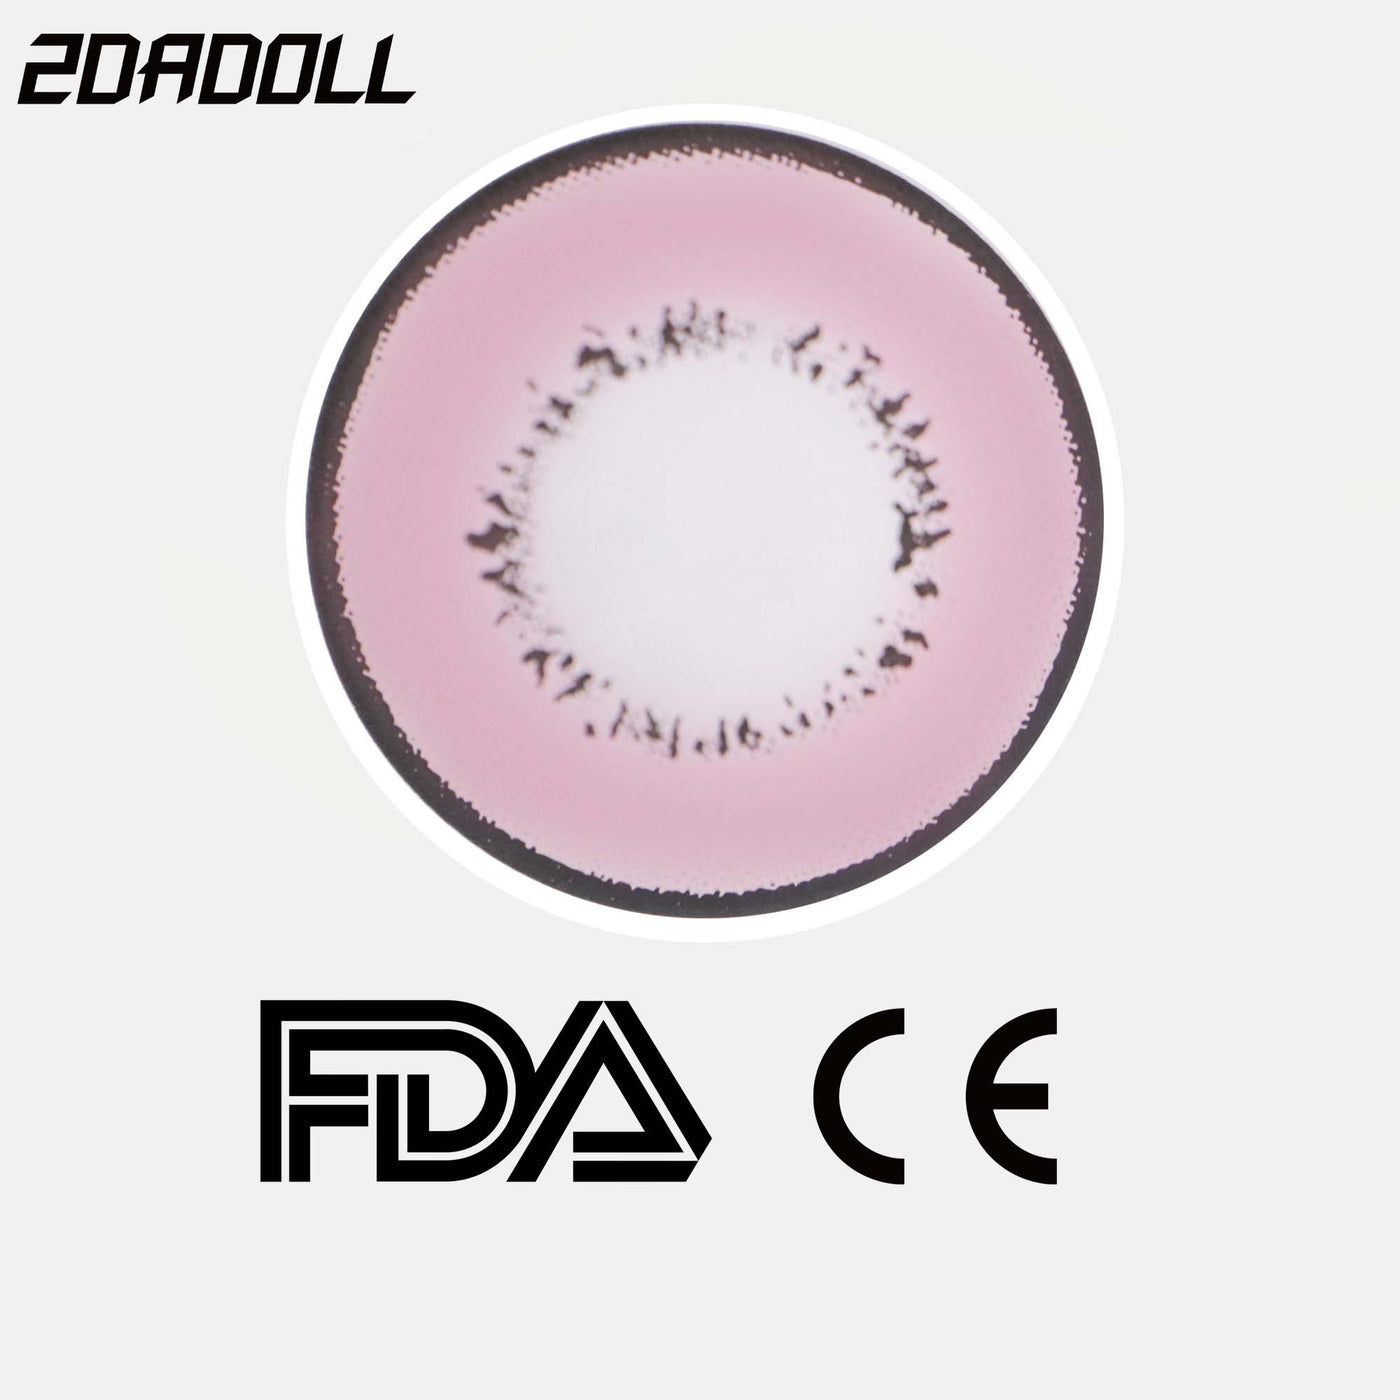 2Dadoll Cutie pink Contact Lenses(1 pair/6 months)